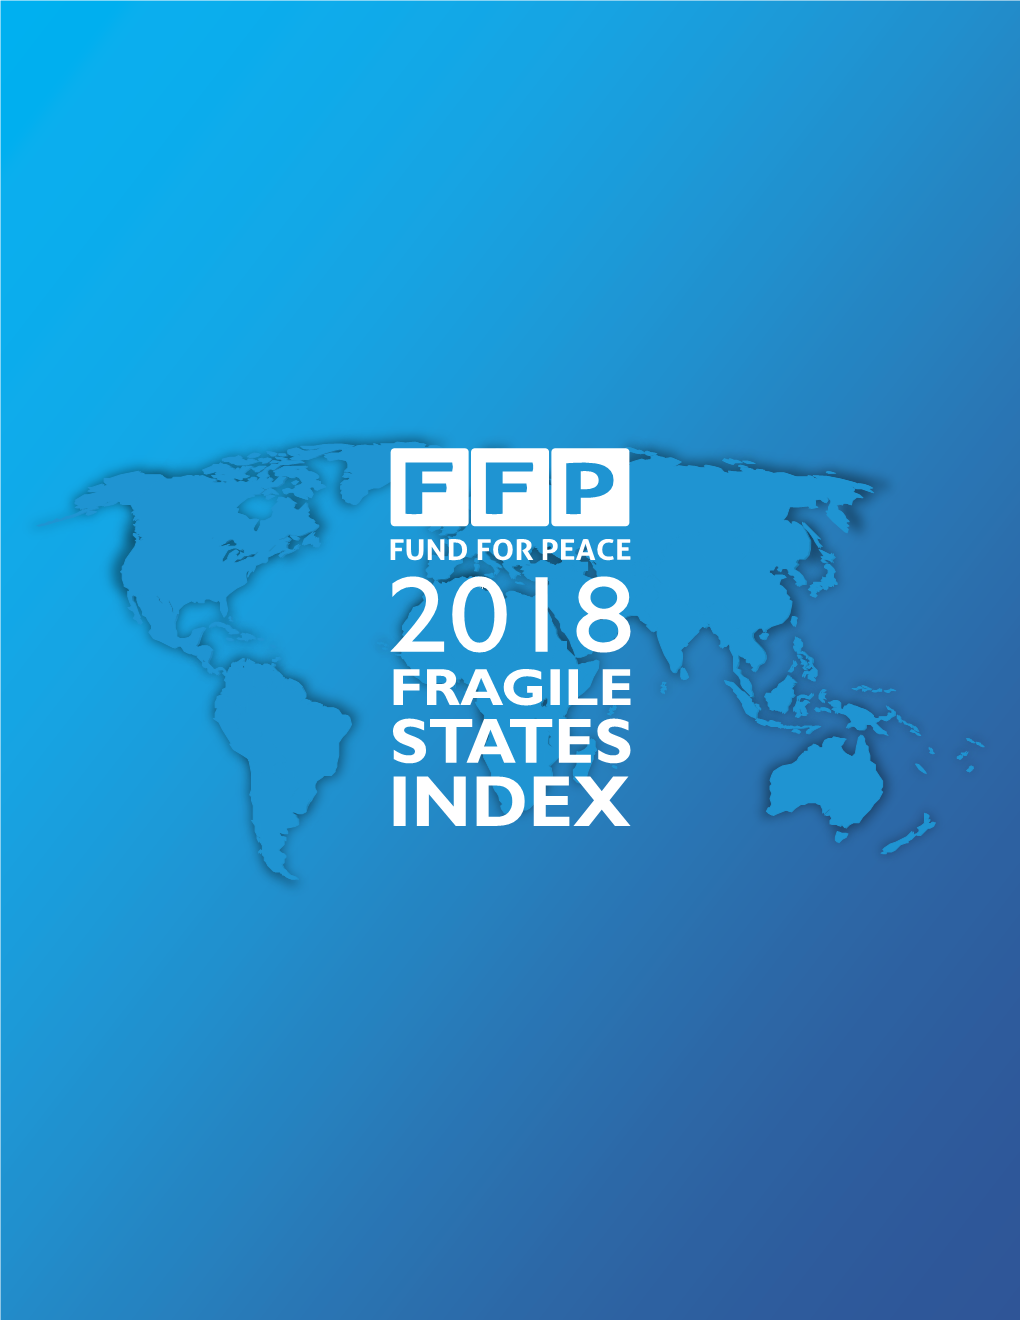 To Download the Fragile States Index Annual Report 2018 in PDF Format